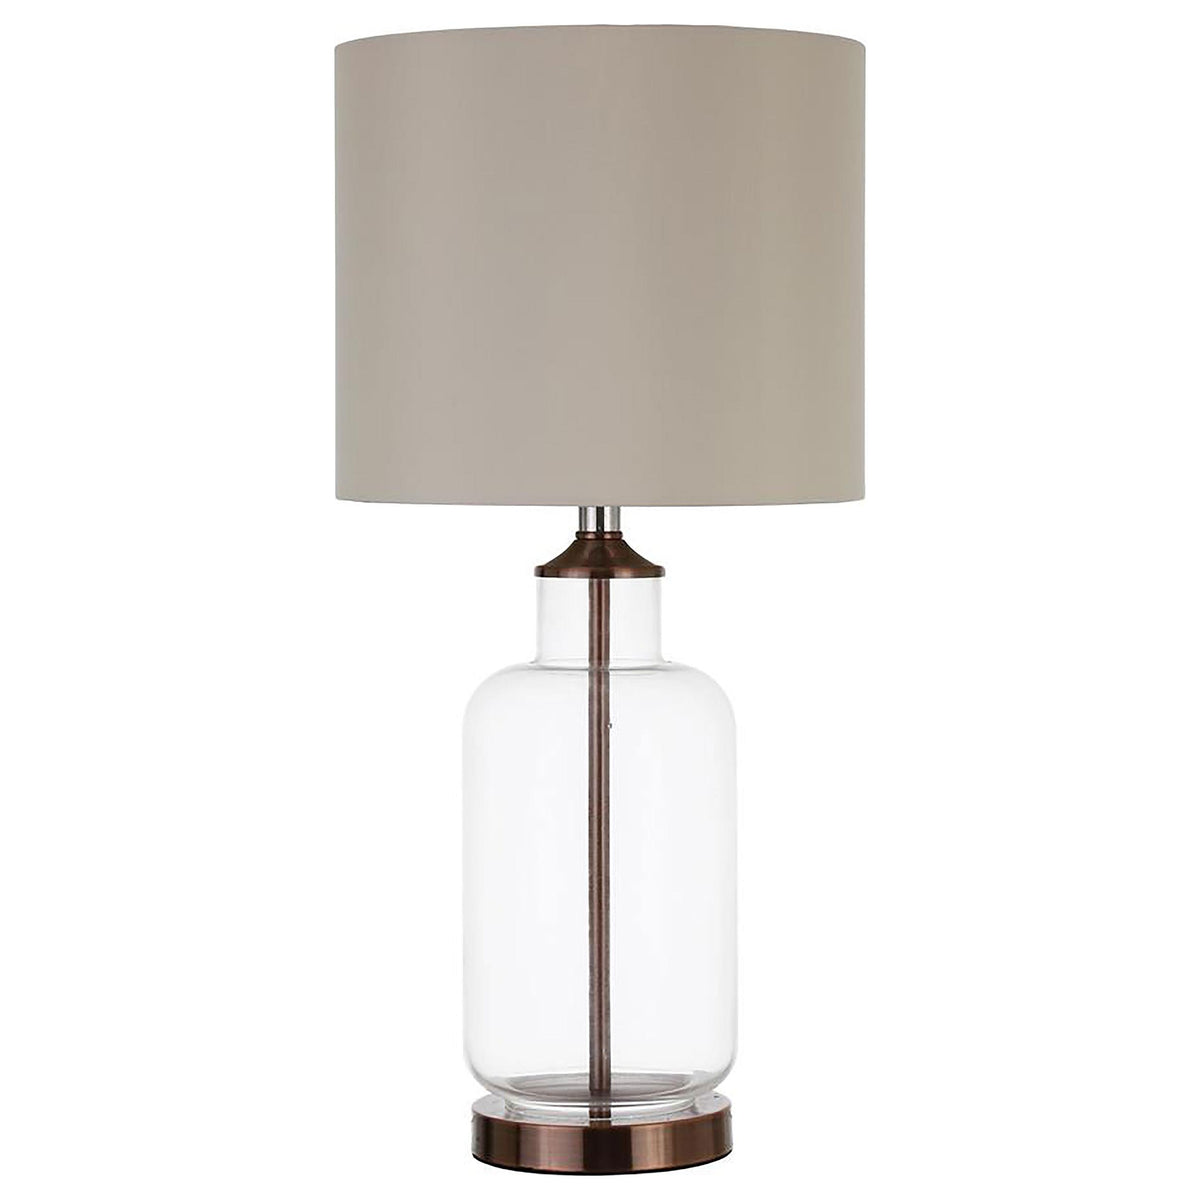 Aisha Drum Shade Table Lamp Creamy Beige and Clear  Half Price Furniture